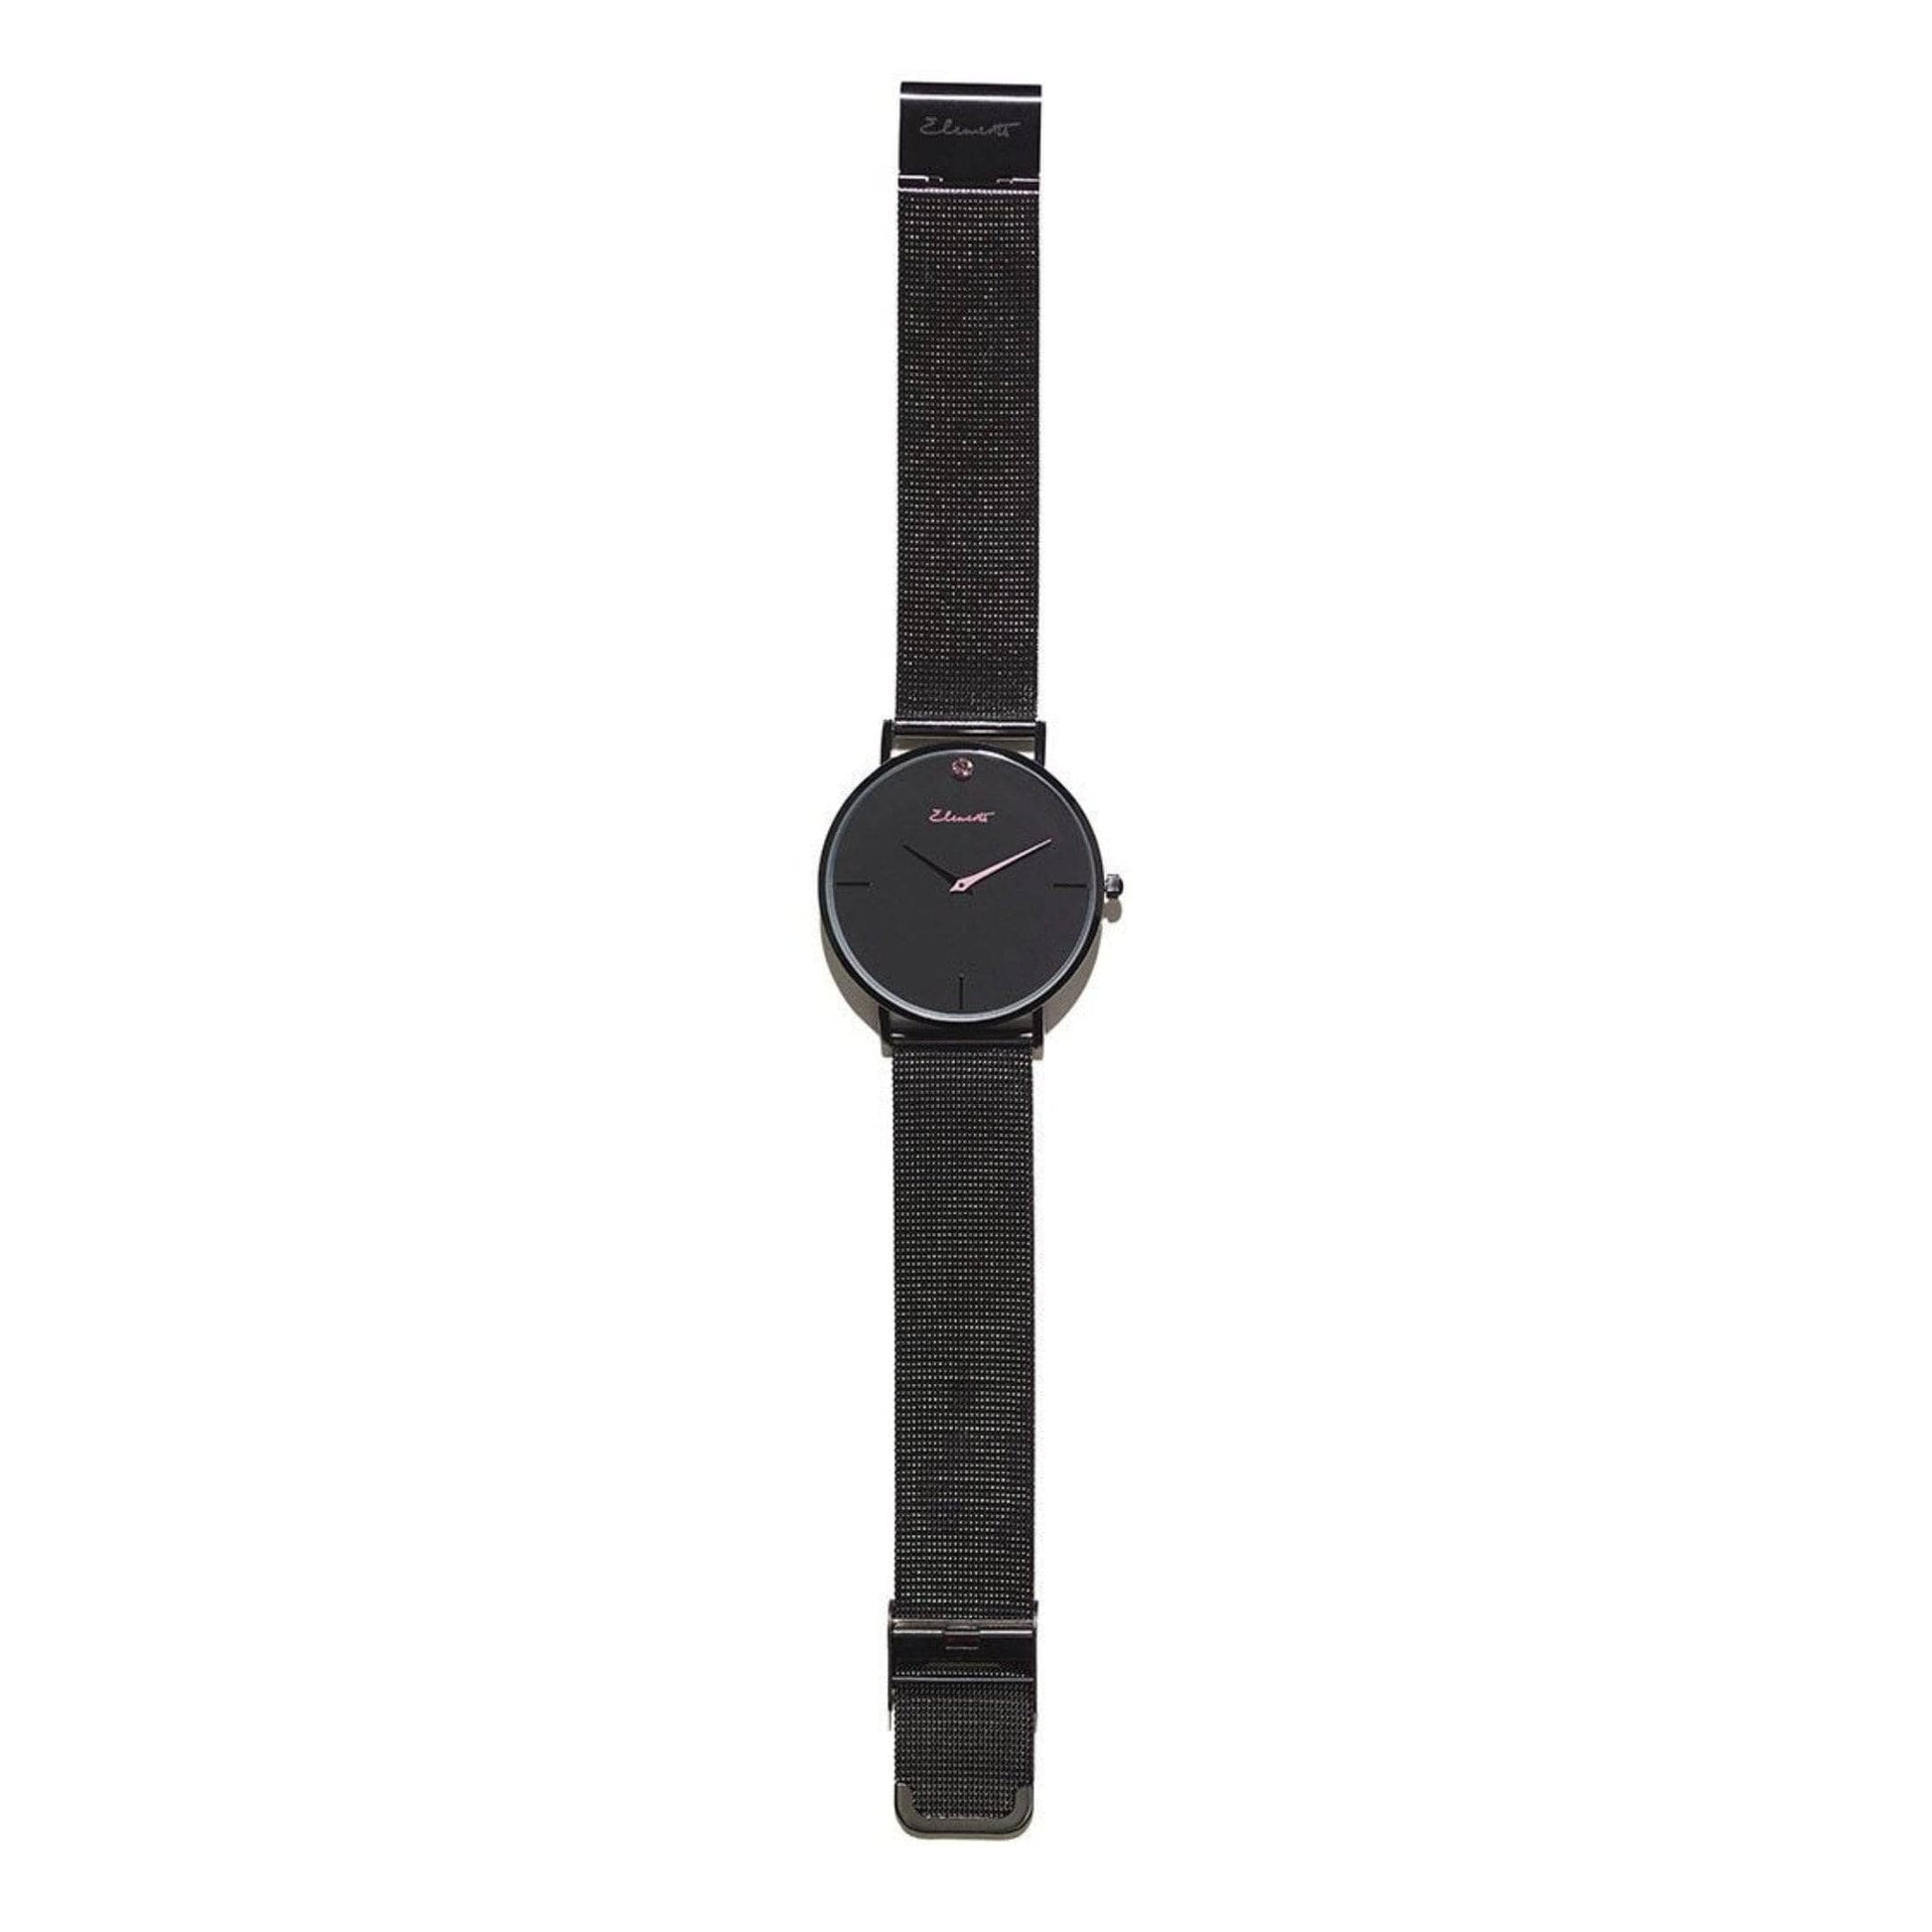 STRENGTH 36 MESH Elements Watches